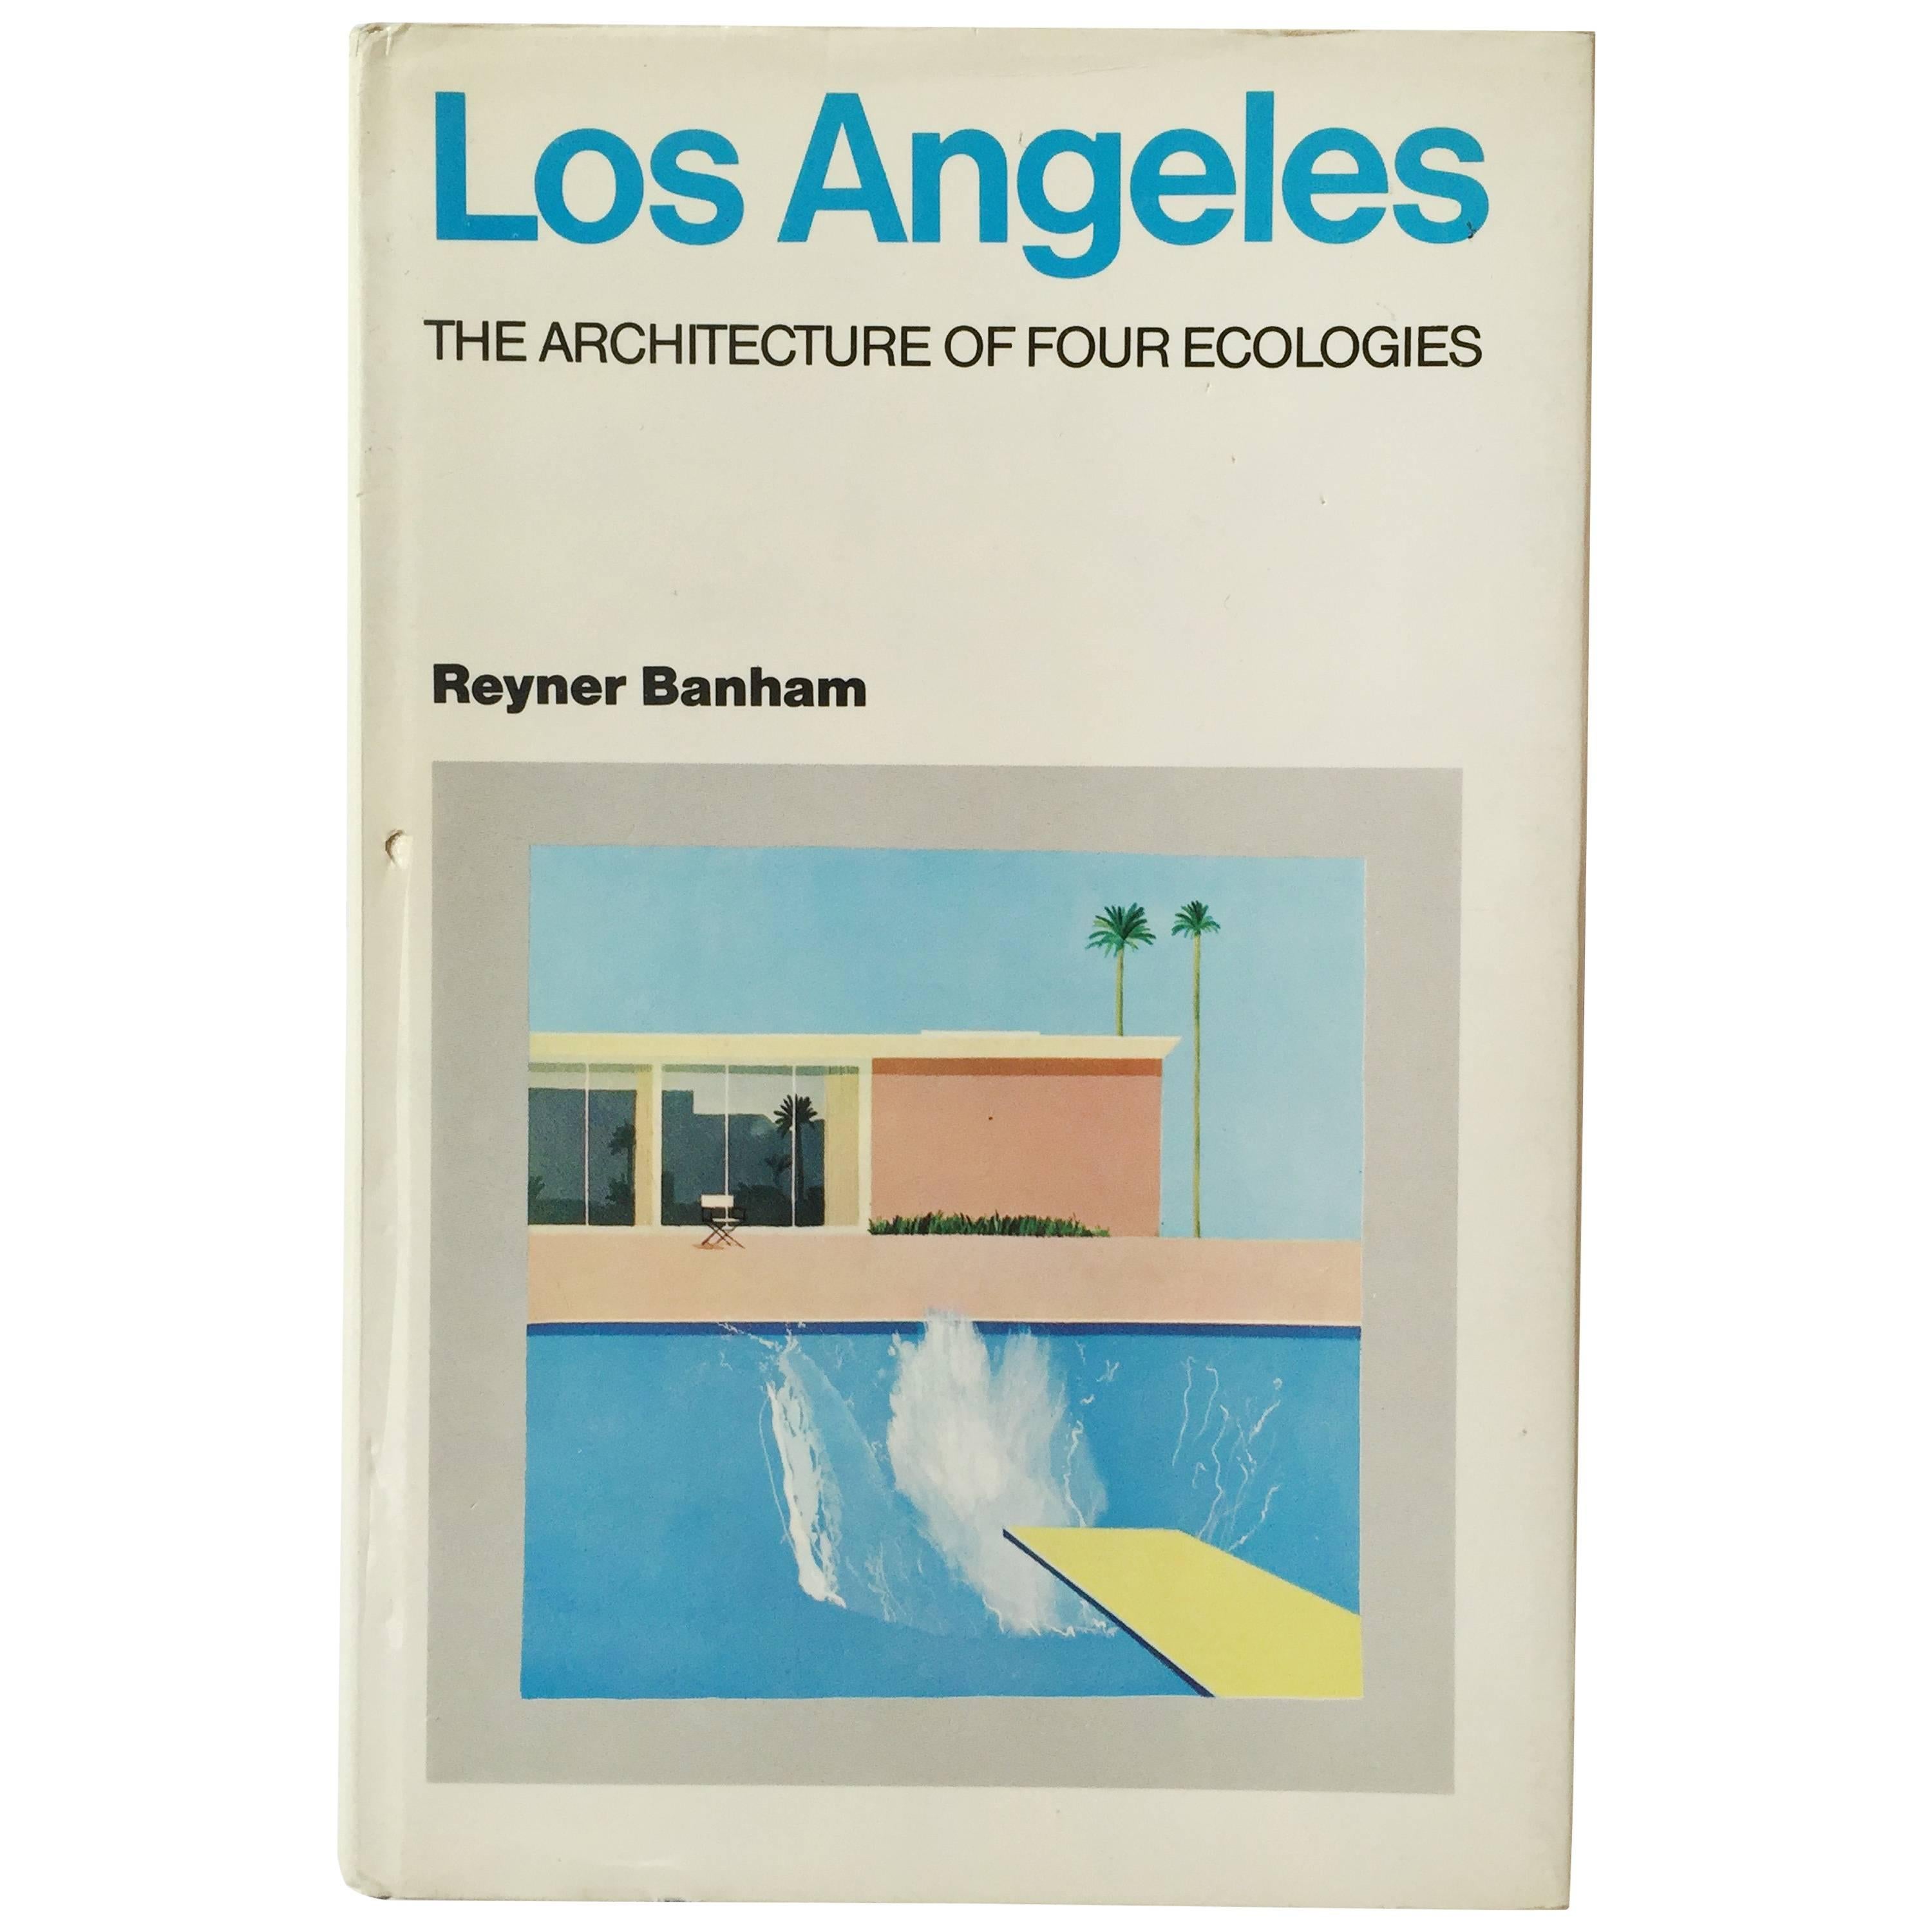 "Reyner Banham – Los Angeles, The Architecture of Four Ecologies" Book